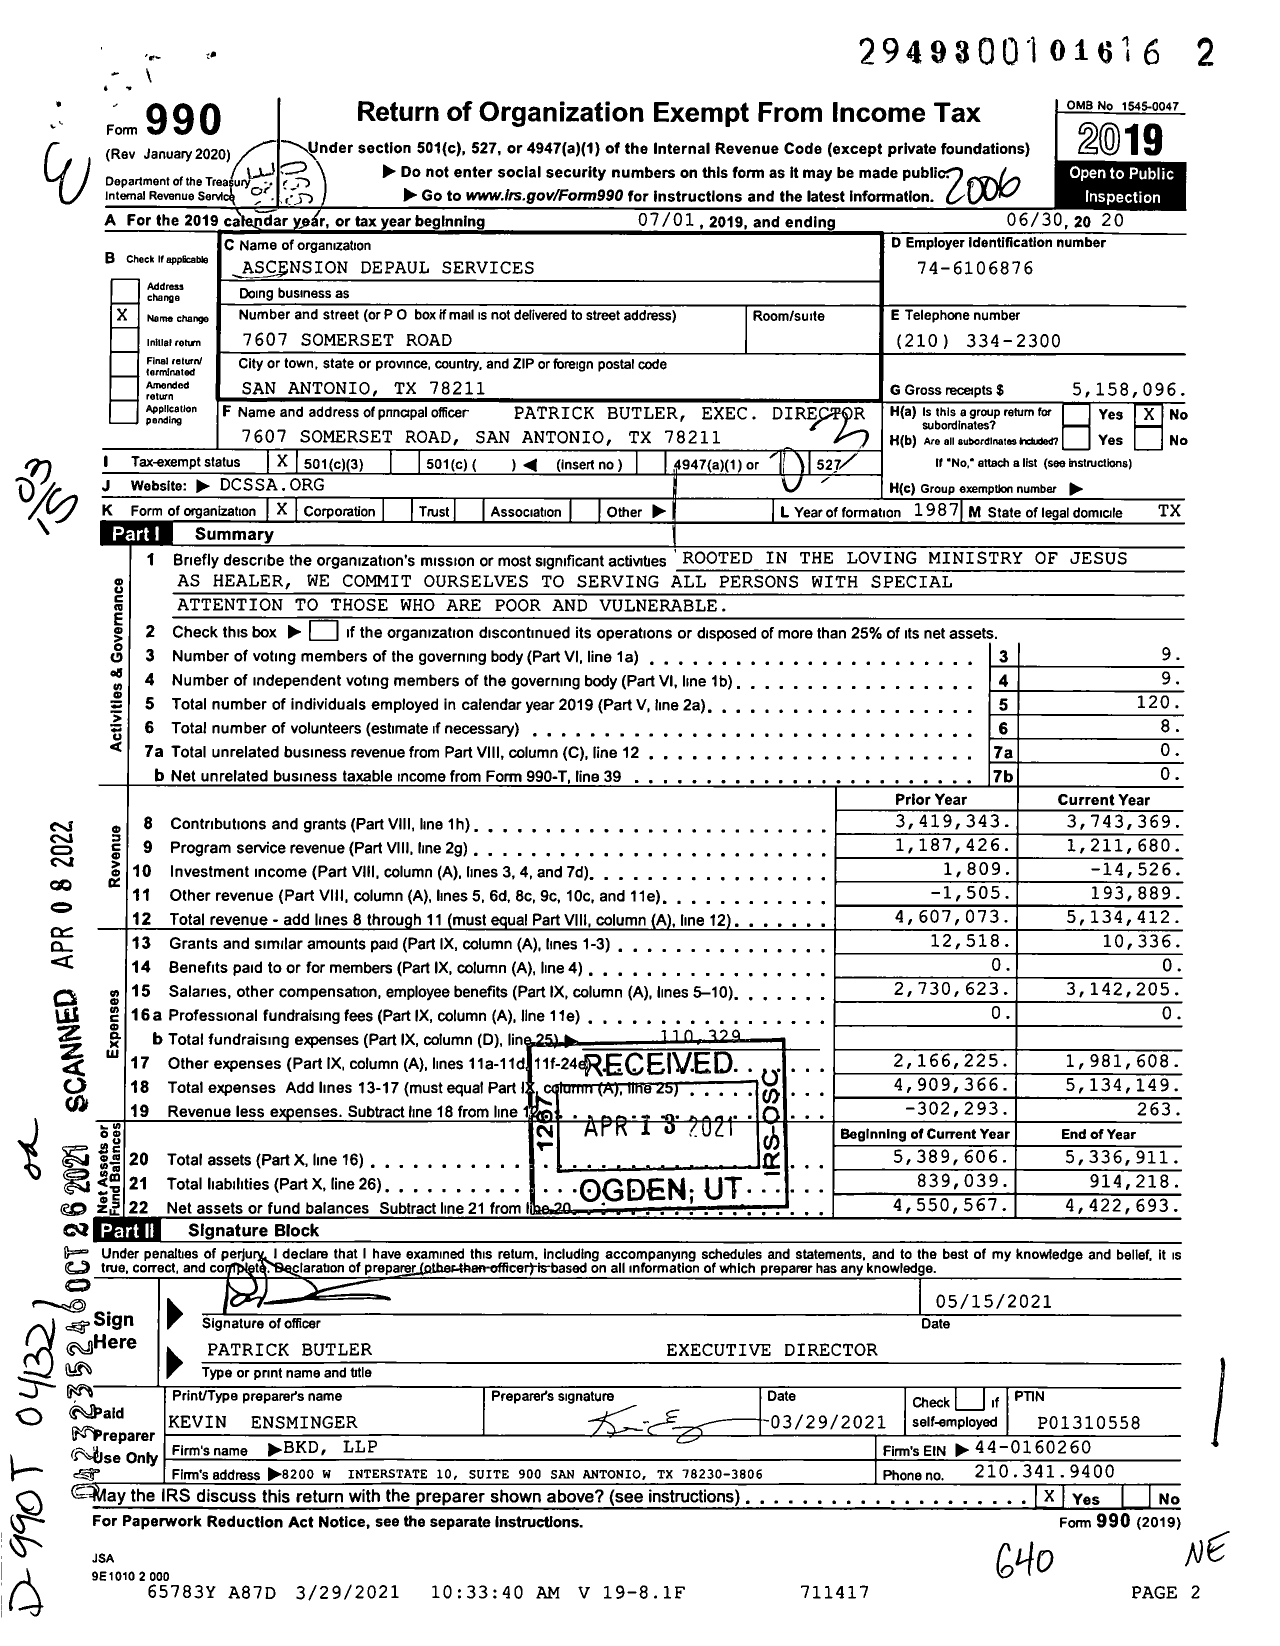 Image of first page of 2019 Form 990 for Ascension Depaul Services (DCSSA )